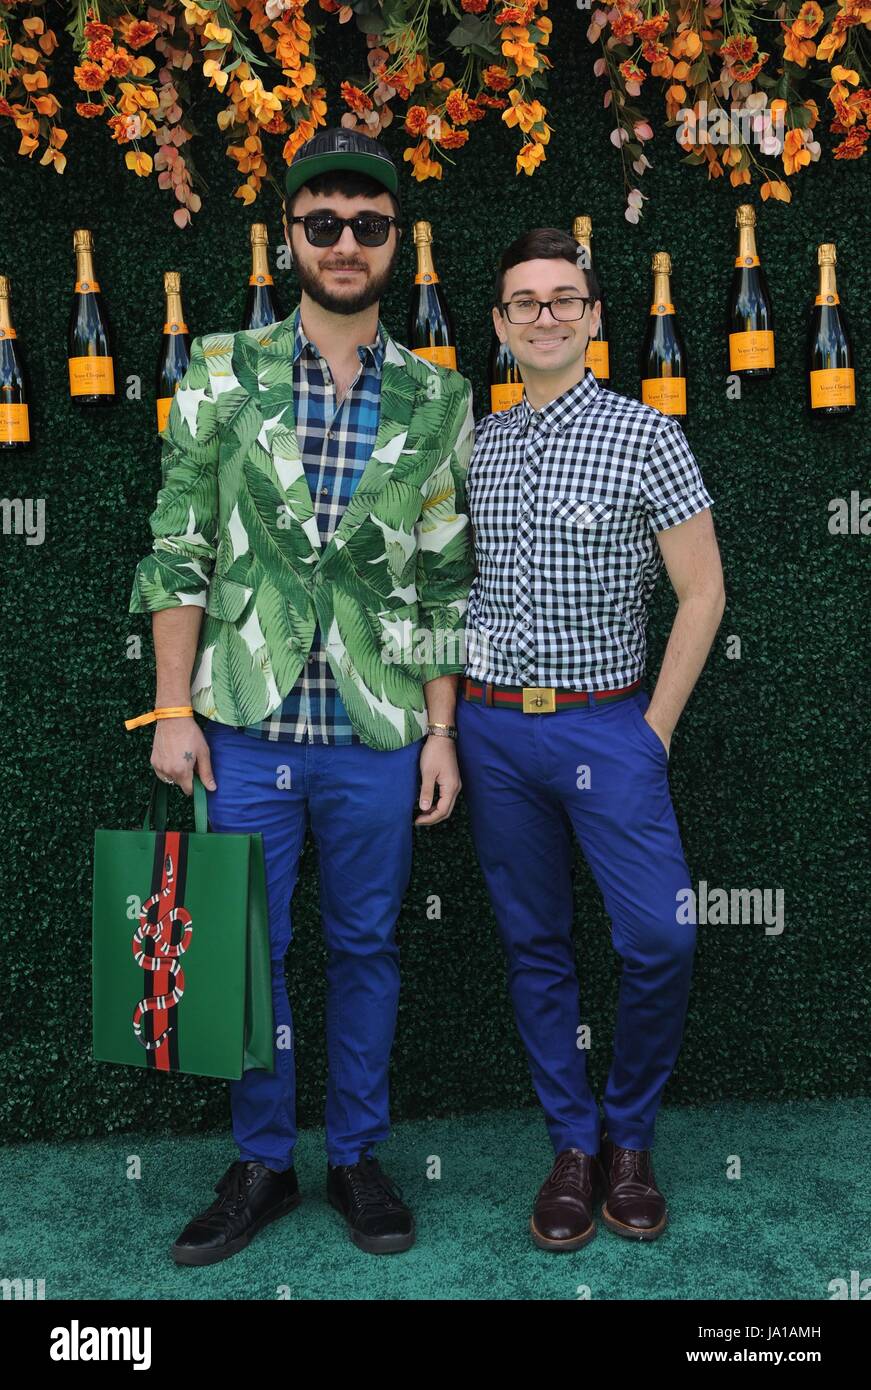 Brad Walsh, Christian Sirano in attendance for 10th Annual Veuve Clicquot Polo Classic, Liberty State Park, Jersey City, NJ June 3, 2017. Photo By: Kristin Callahan/Everett Collection Stock Photo